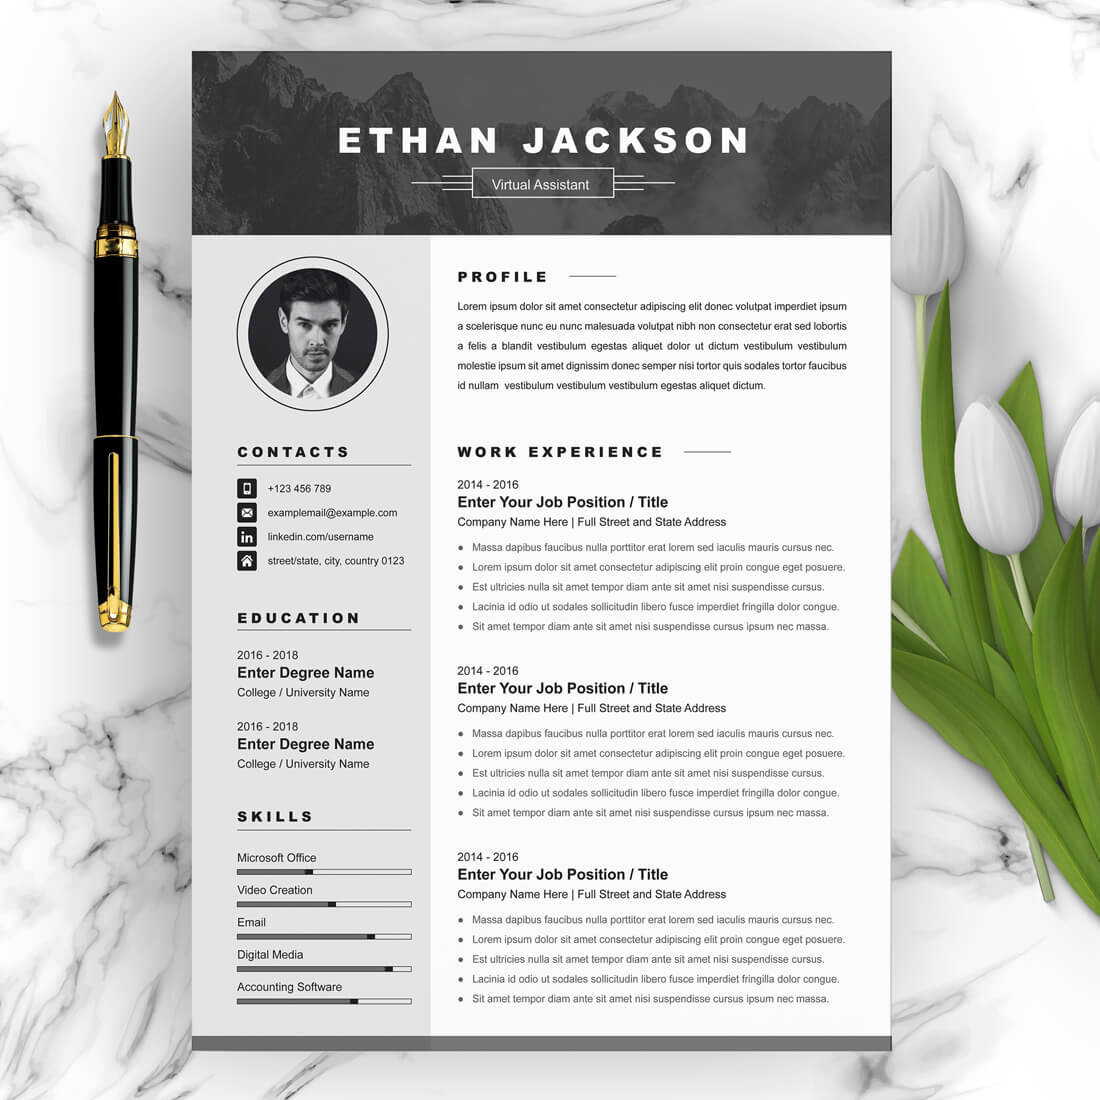 Professional resume with a black and white theme.